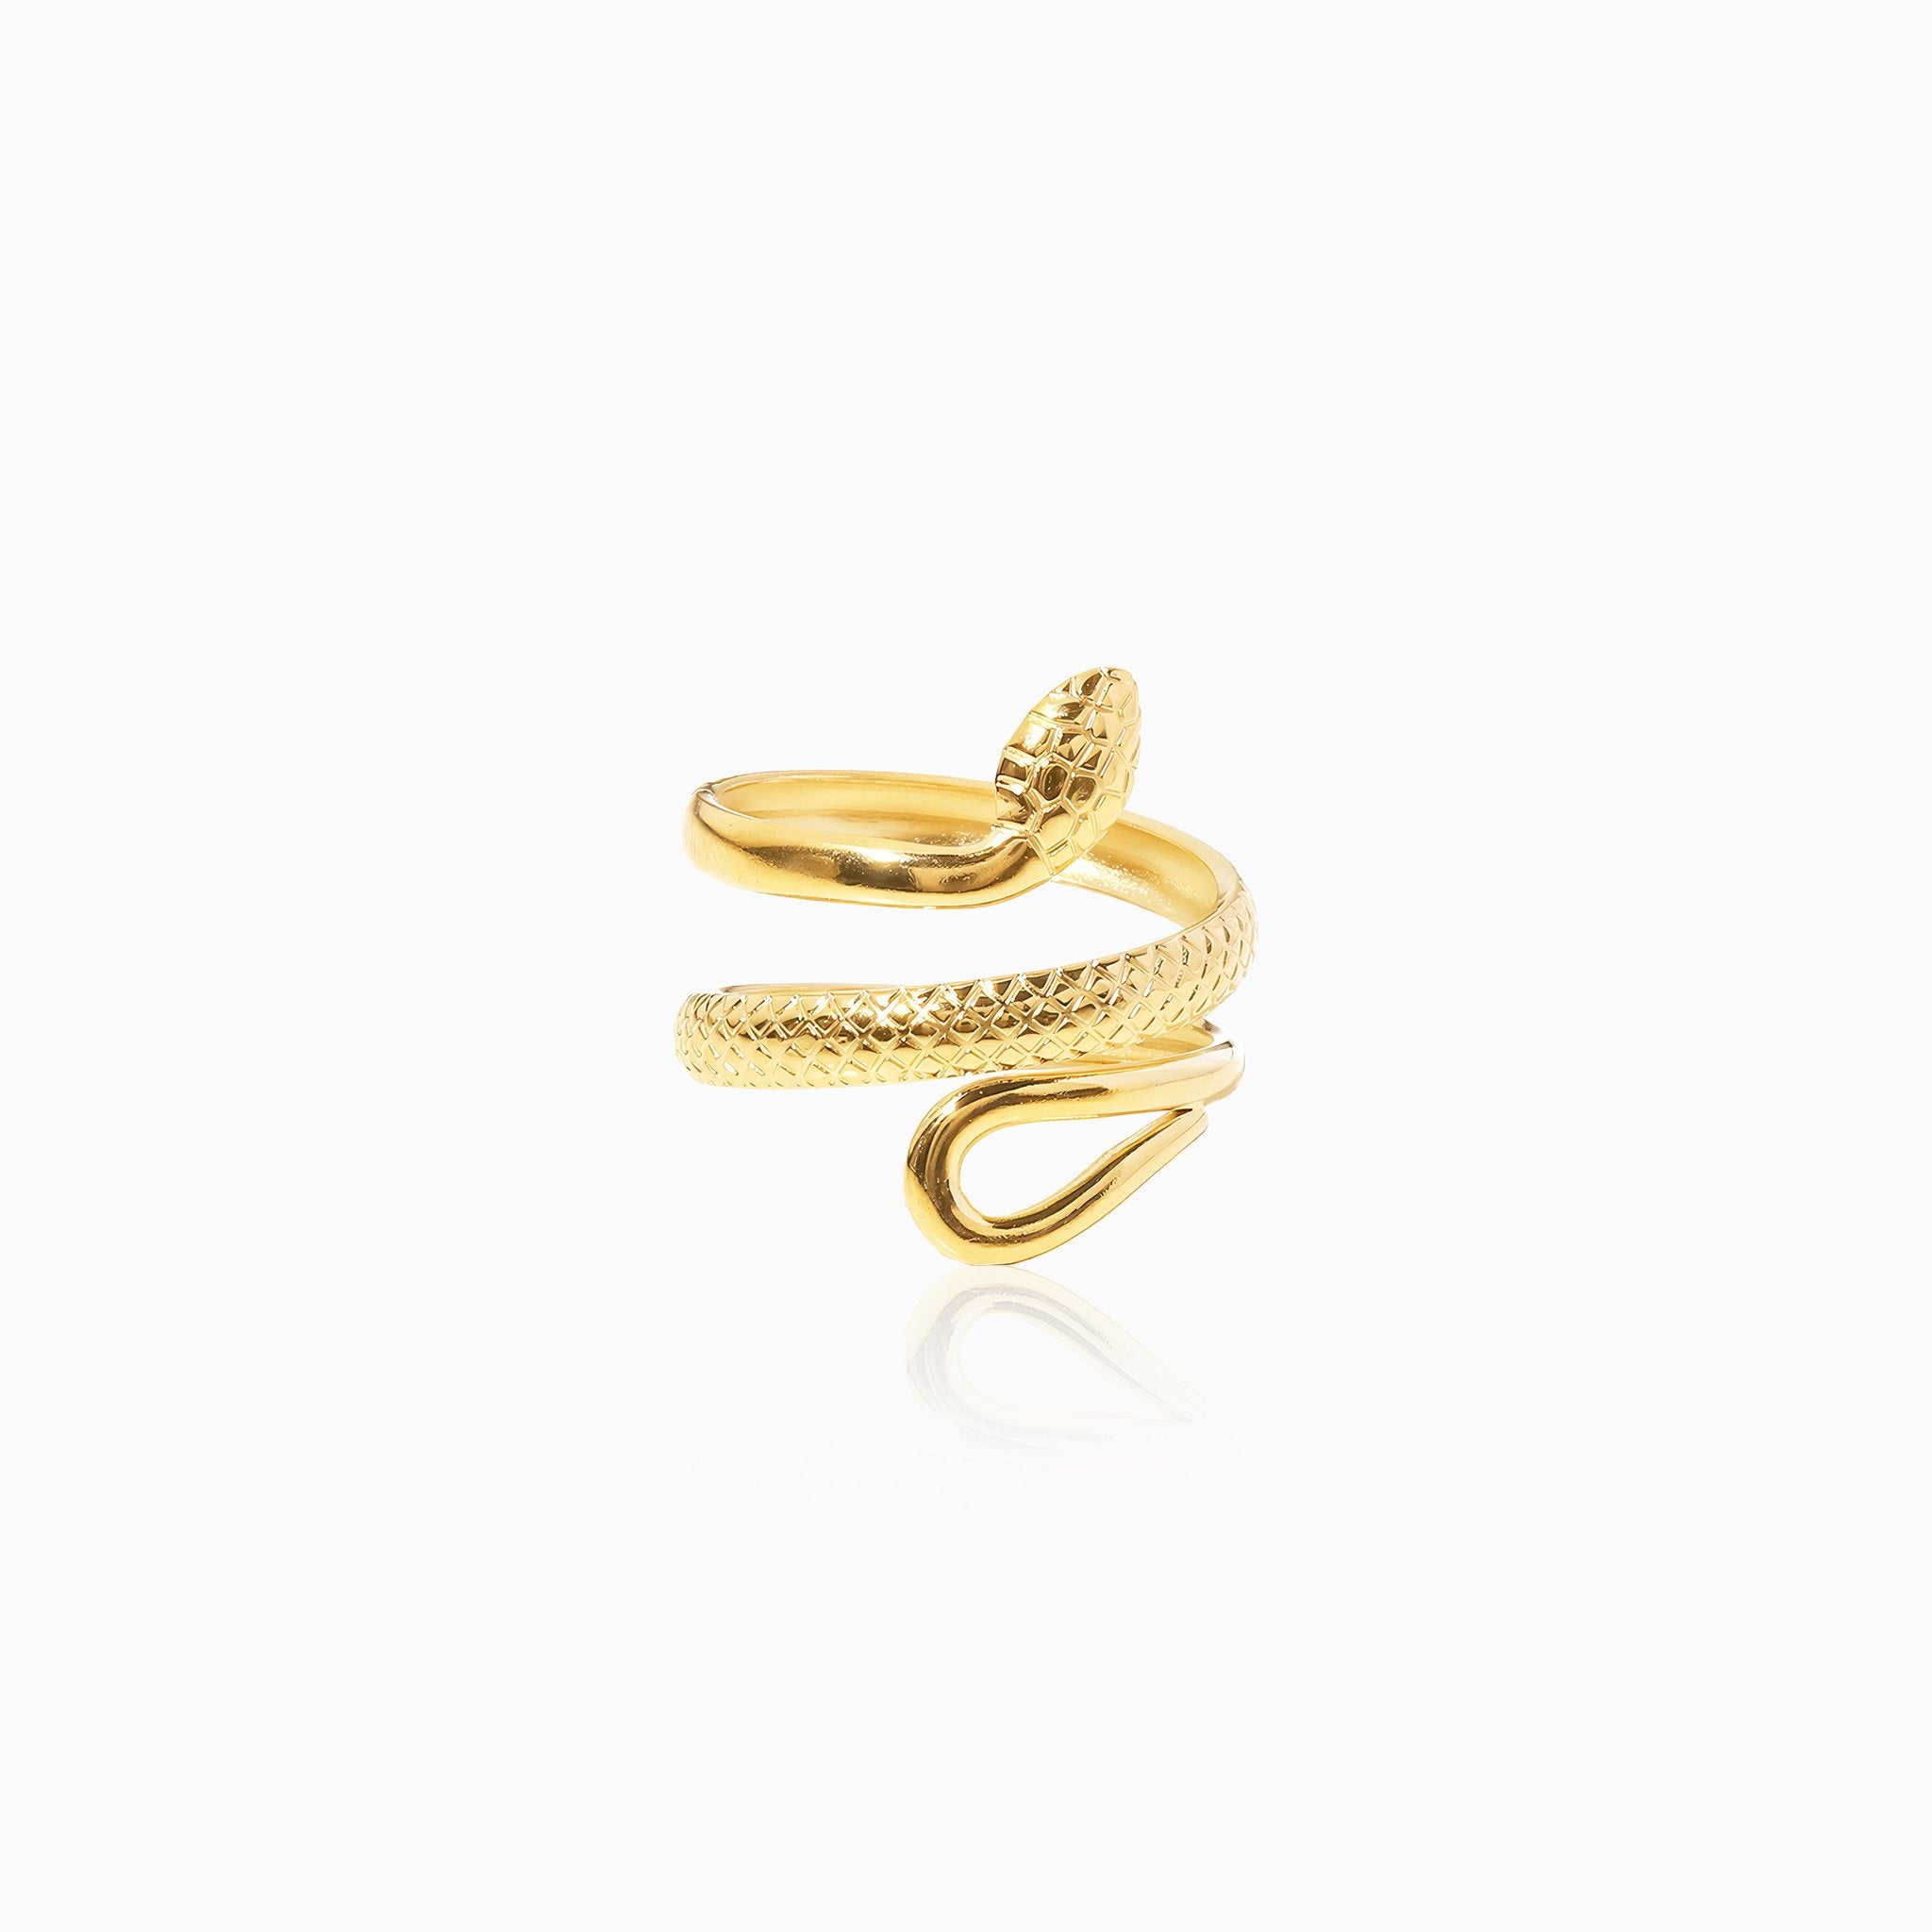 Classic Snake Design Adjustable Ring - Nobbier - Ring - 18K Gold And Titanium PVD Coated Jewelry